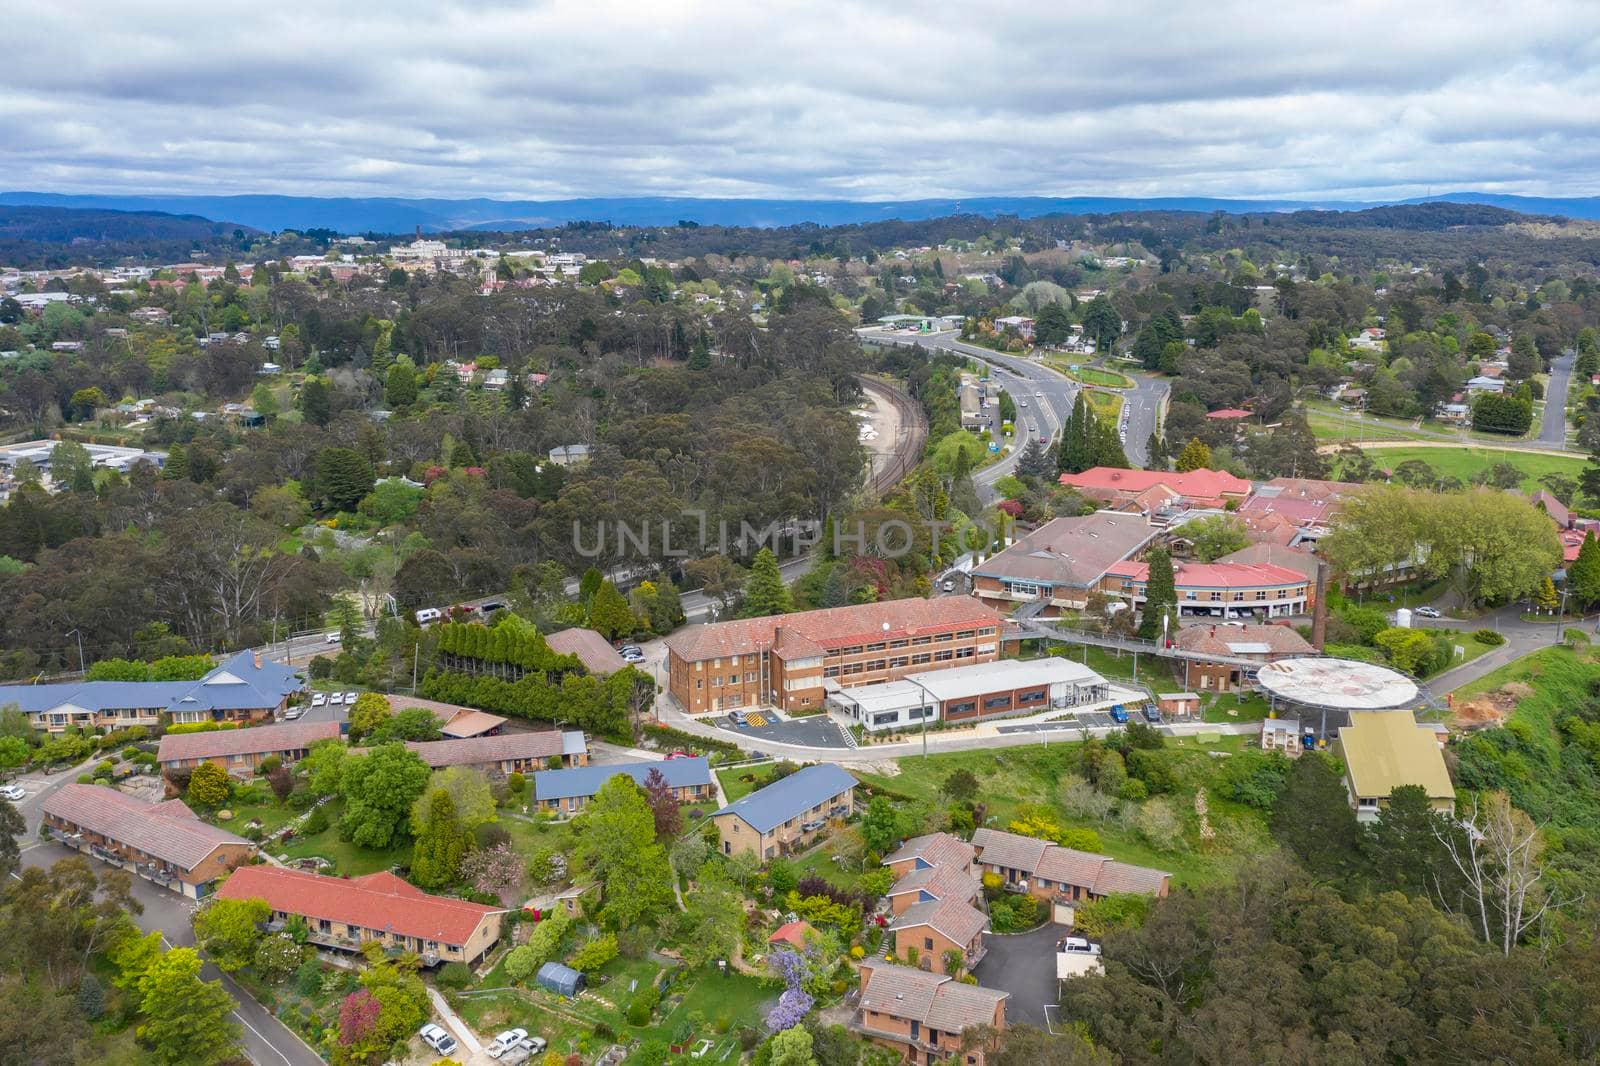 Aerial view of the township of Katoomba in regional New South Wales in Australia by WittkePhotos